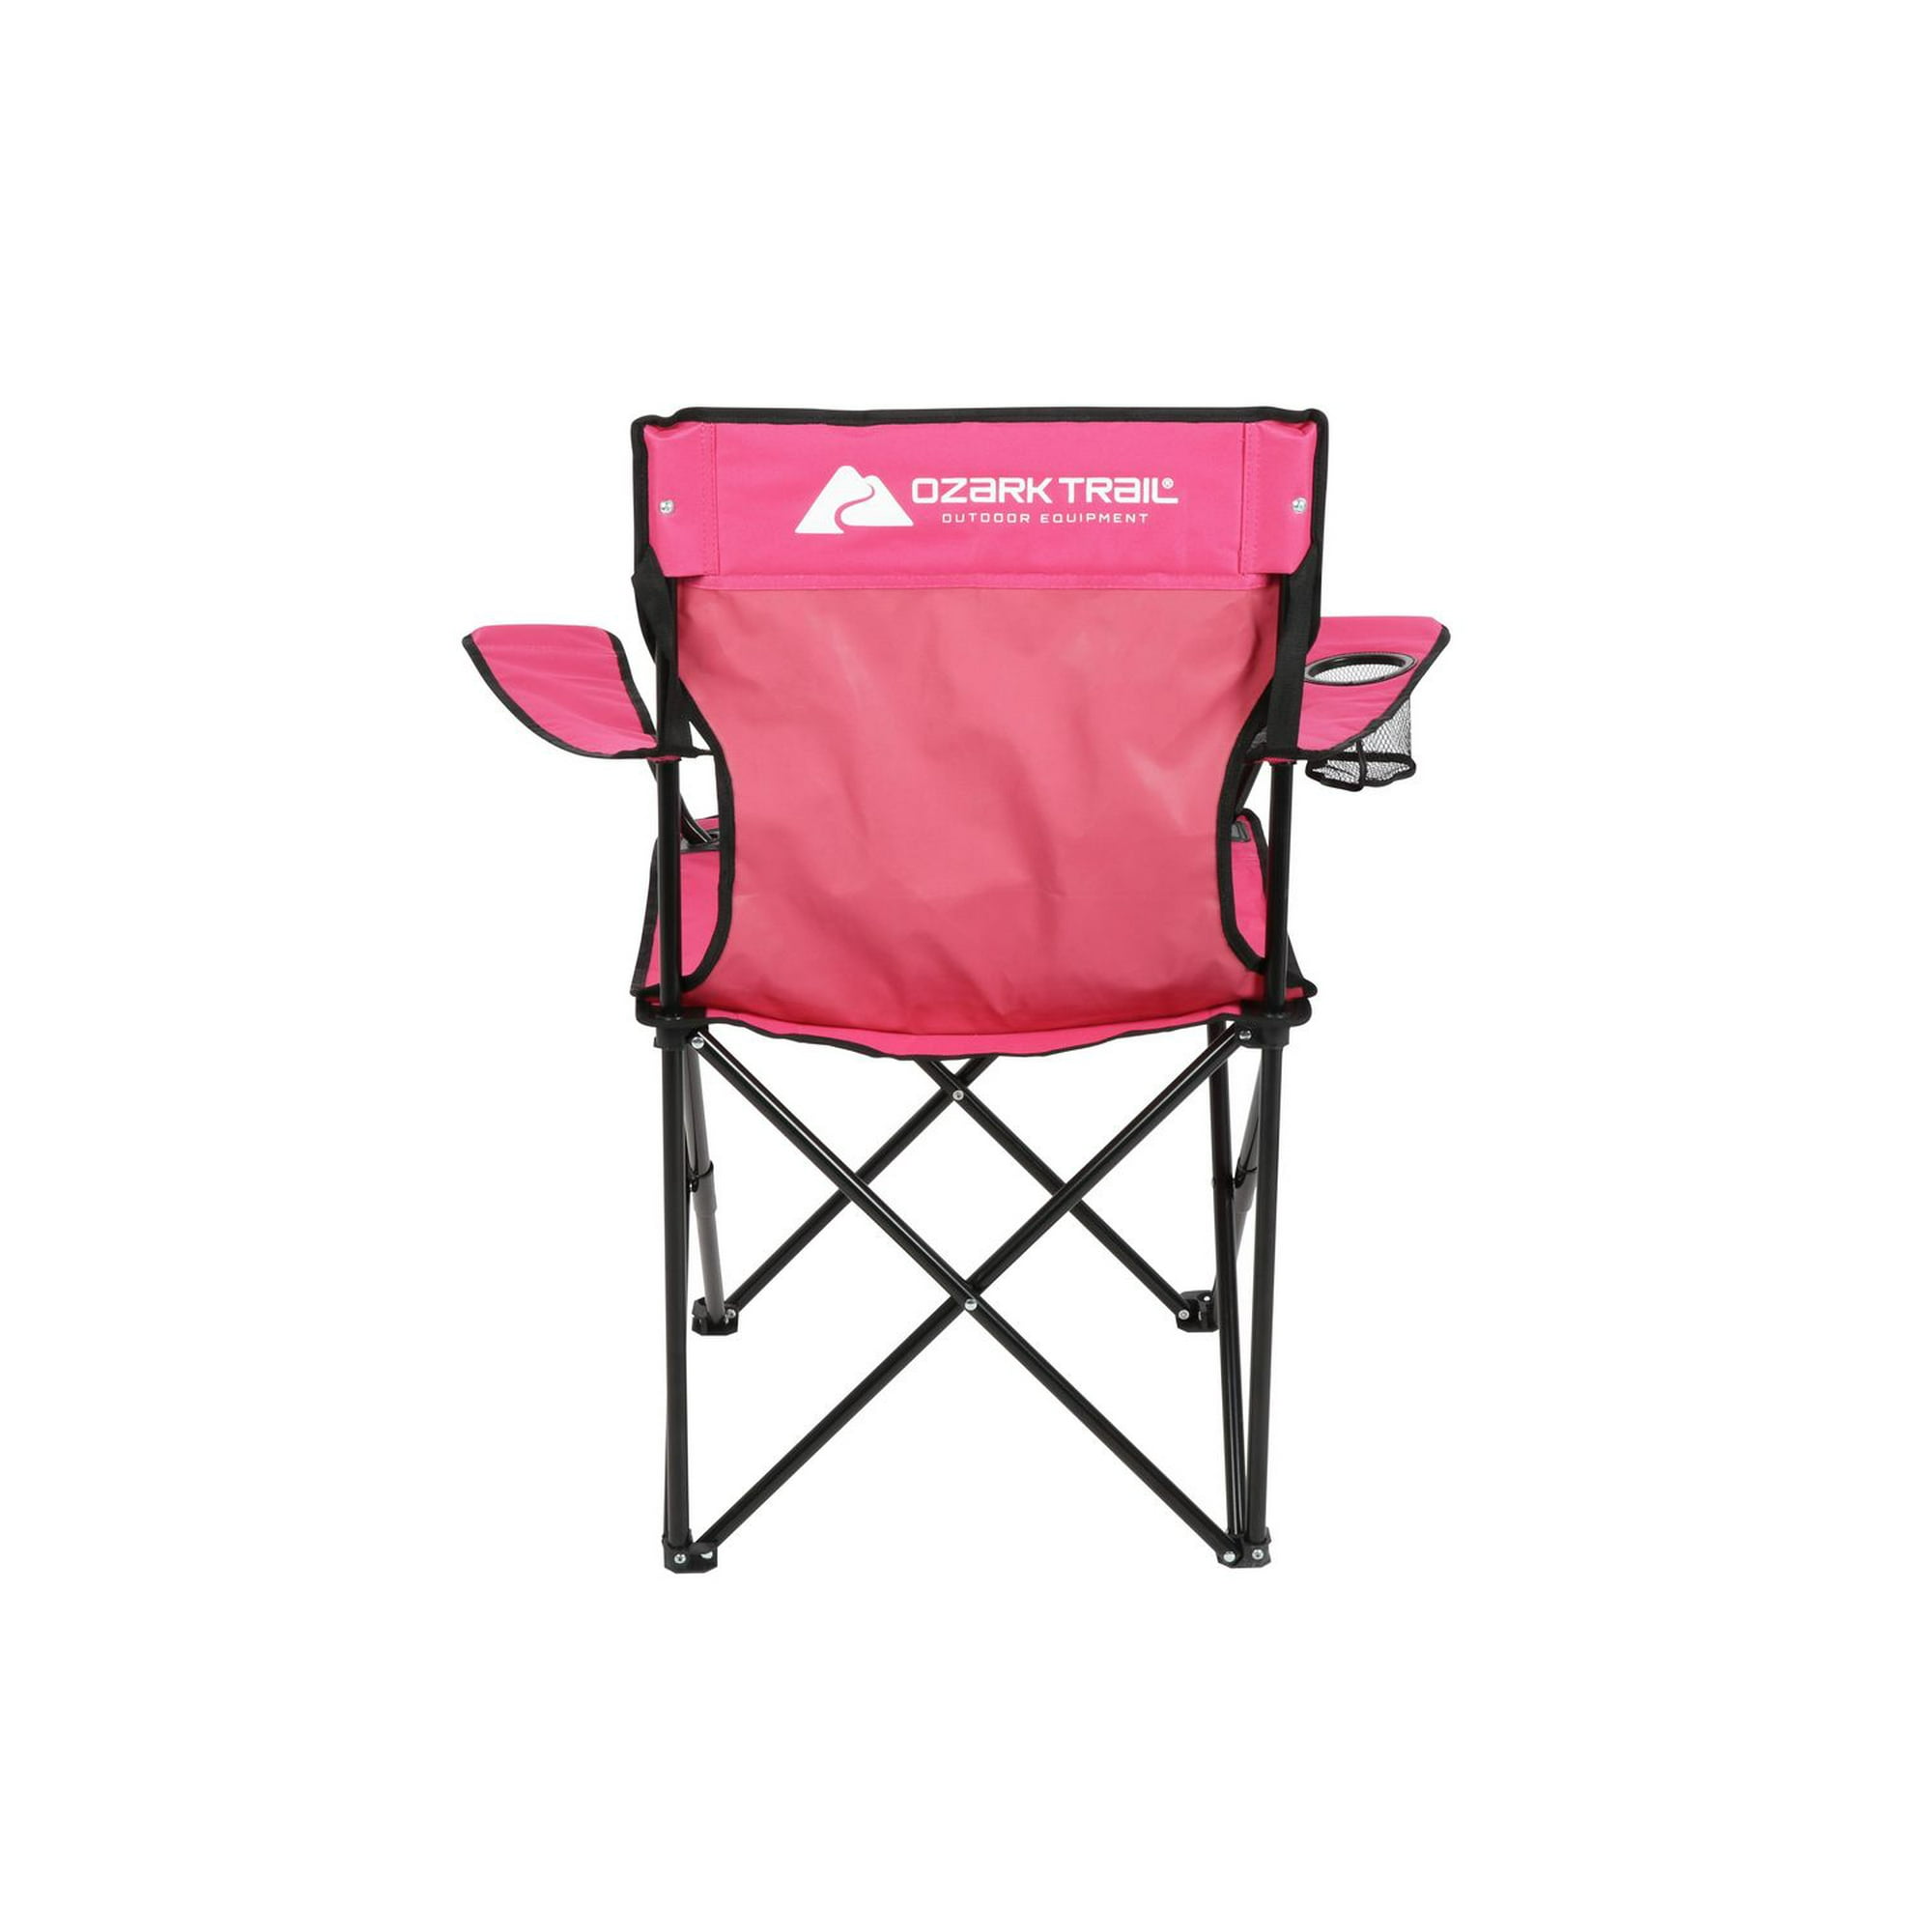 Ozark Trail High Back Camping Chair Pink with Cupholder Pocket and Headrest  Adult Portable Chair Beach Chairs Outdoor